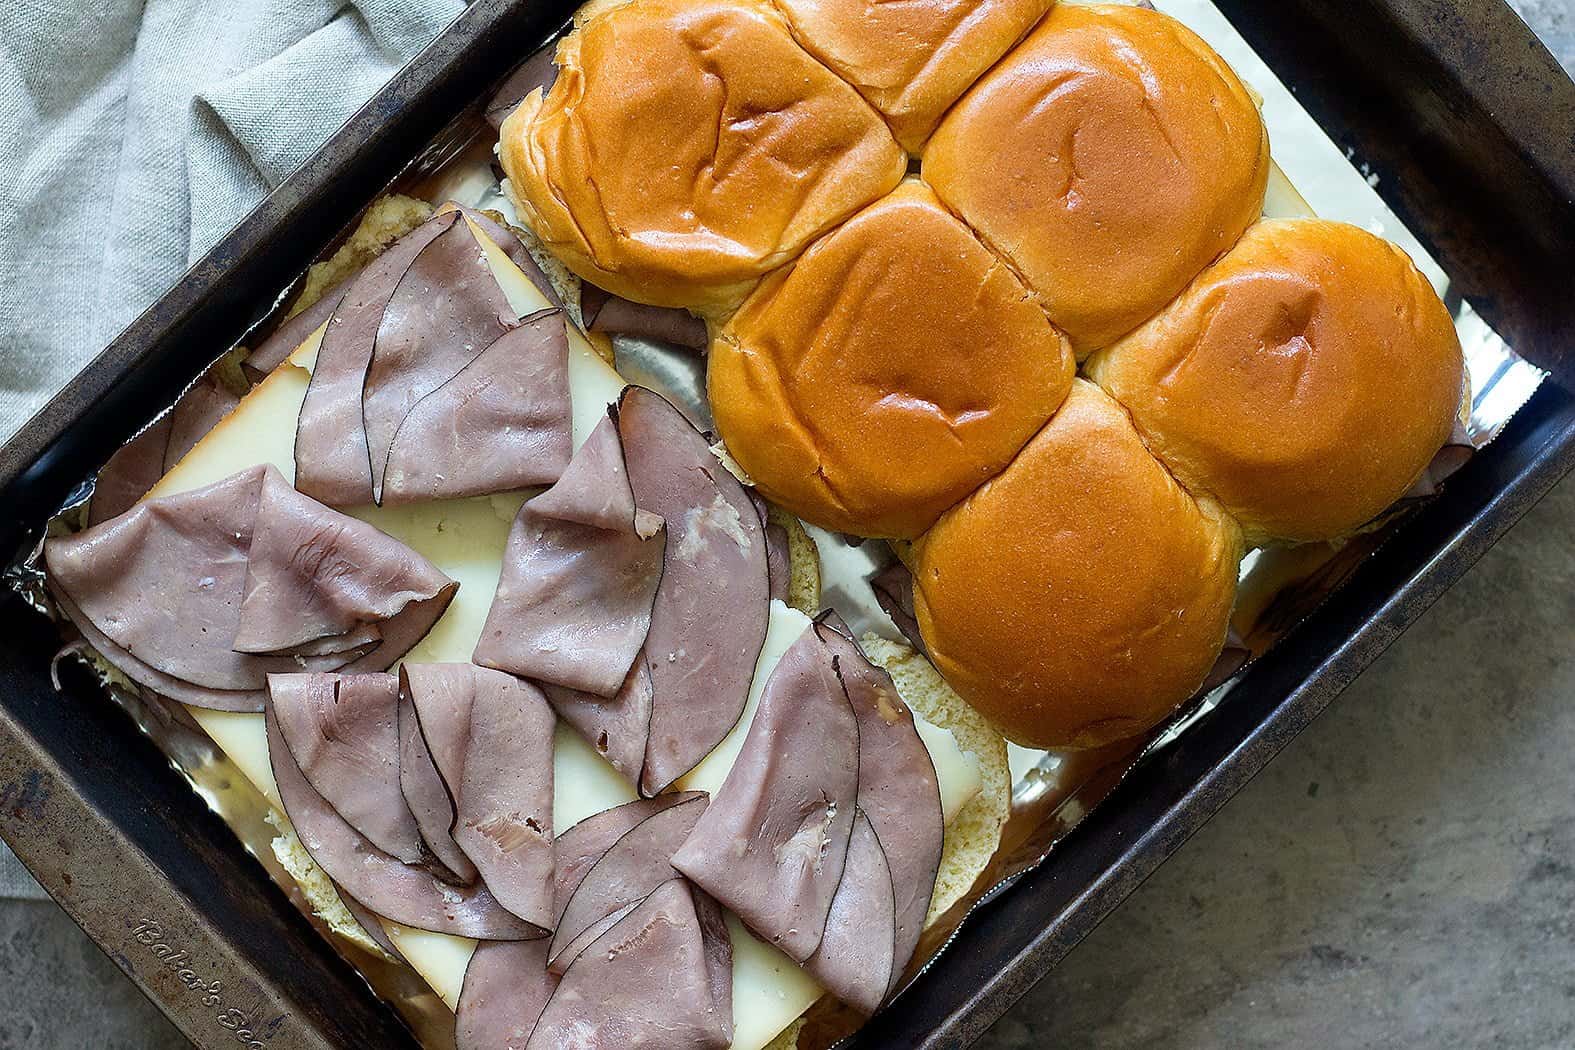 Place the bottoms in a 9x13 baking pan or on a baking sheet lined with aluminum foil. Spread a little bit of the melted butter mixture on the rolls. Top with half of the roast beef and then top with cheese. Add another layer of roast beef and finish with the top layer of the Hawaiian rolls. 